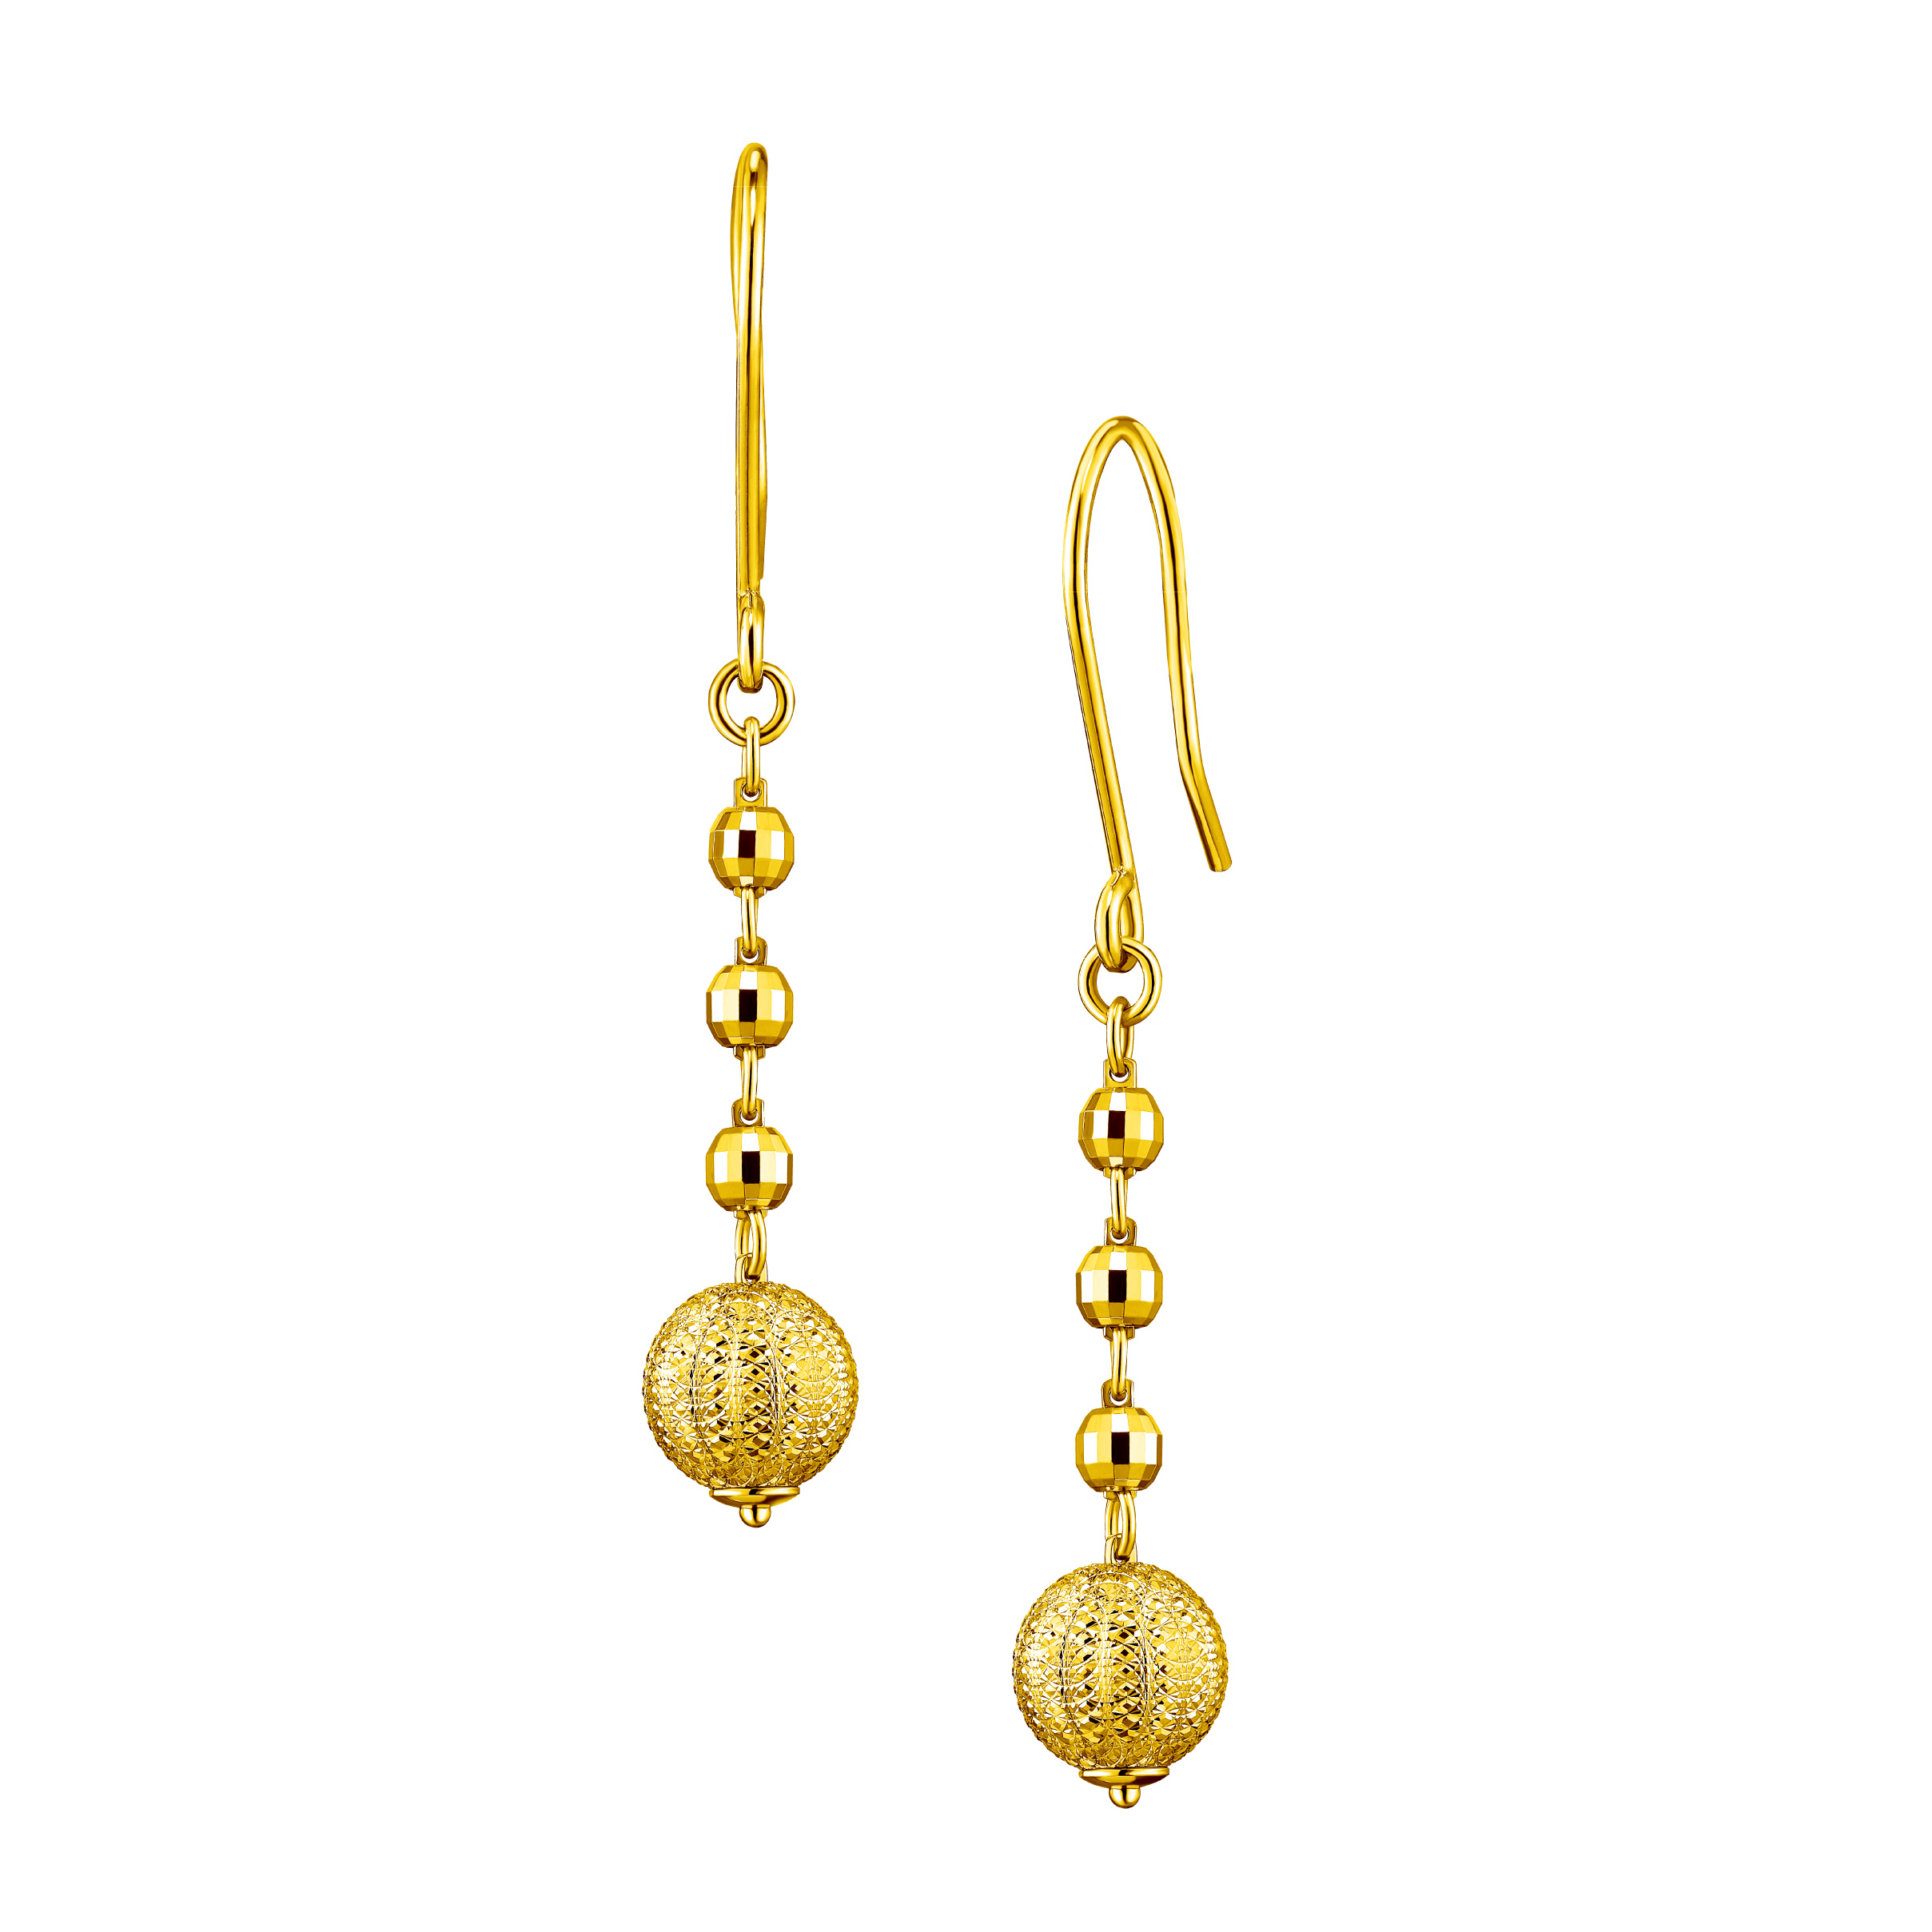 Goldstyle "Therapeutic Planet" Gold Earrings